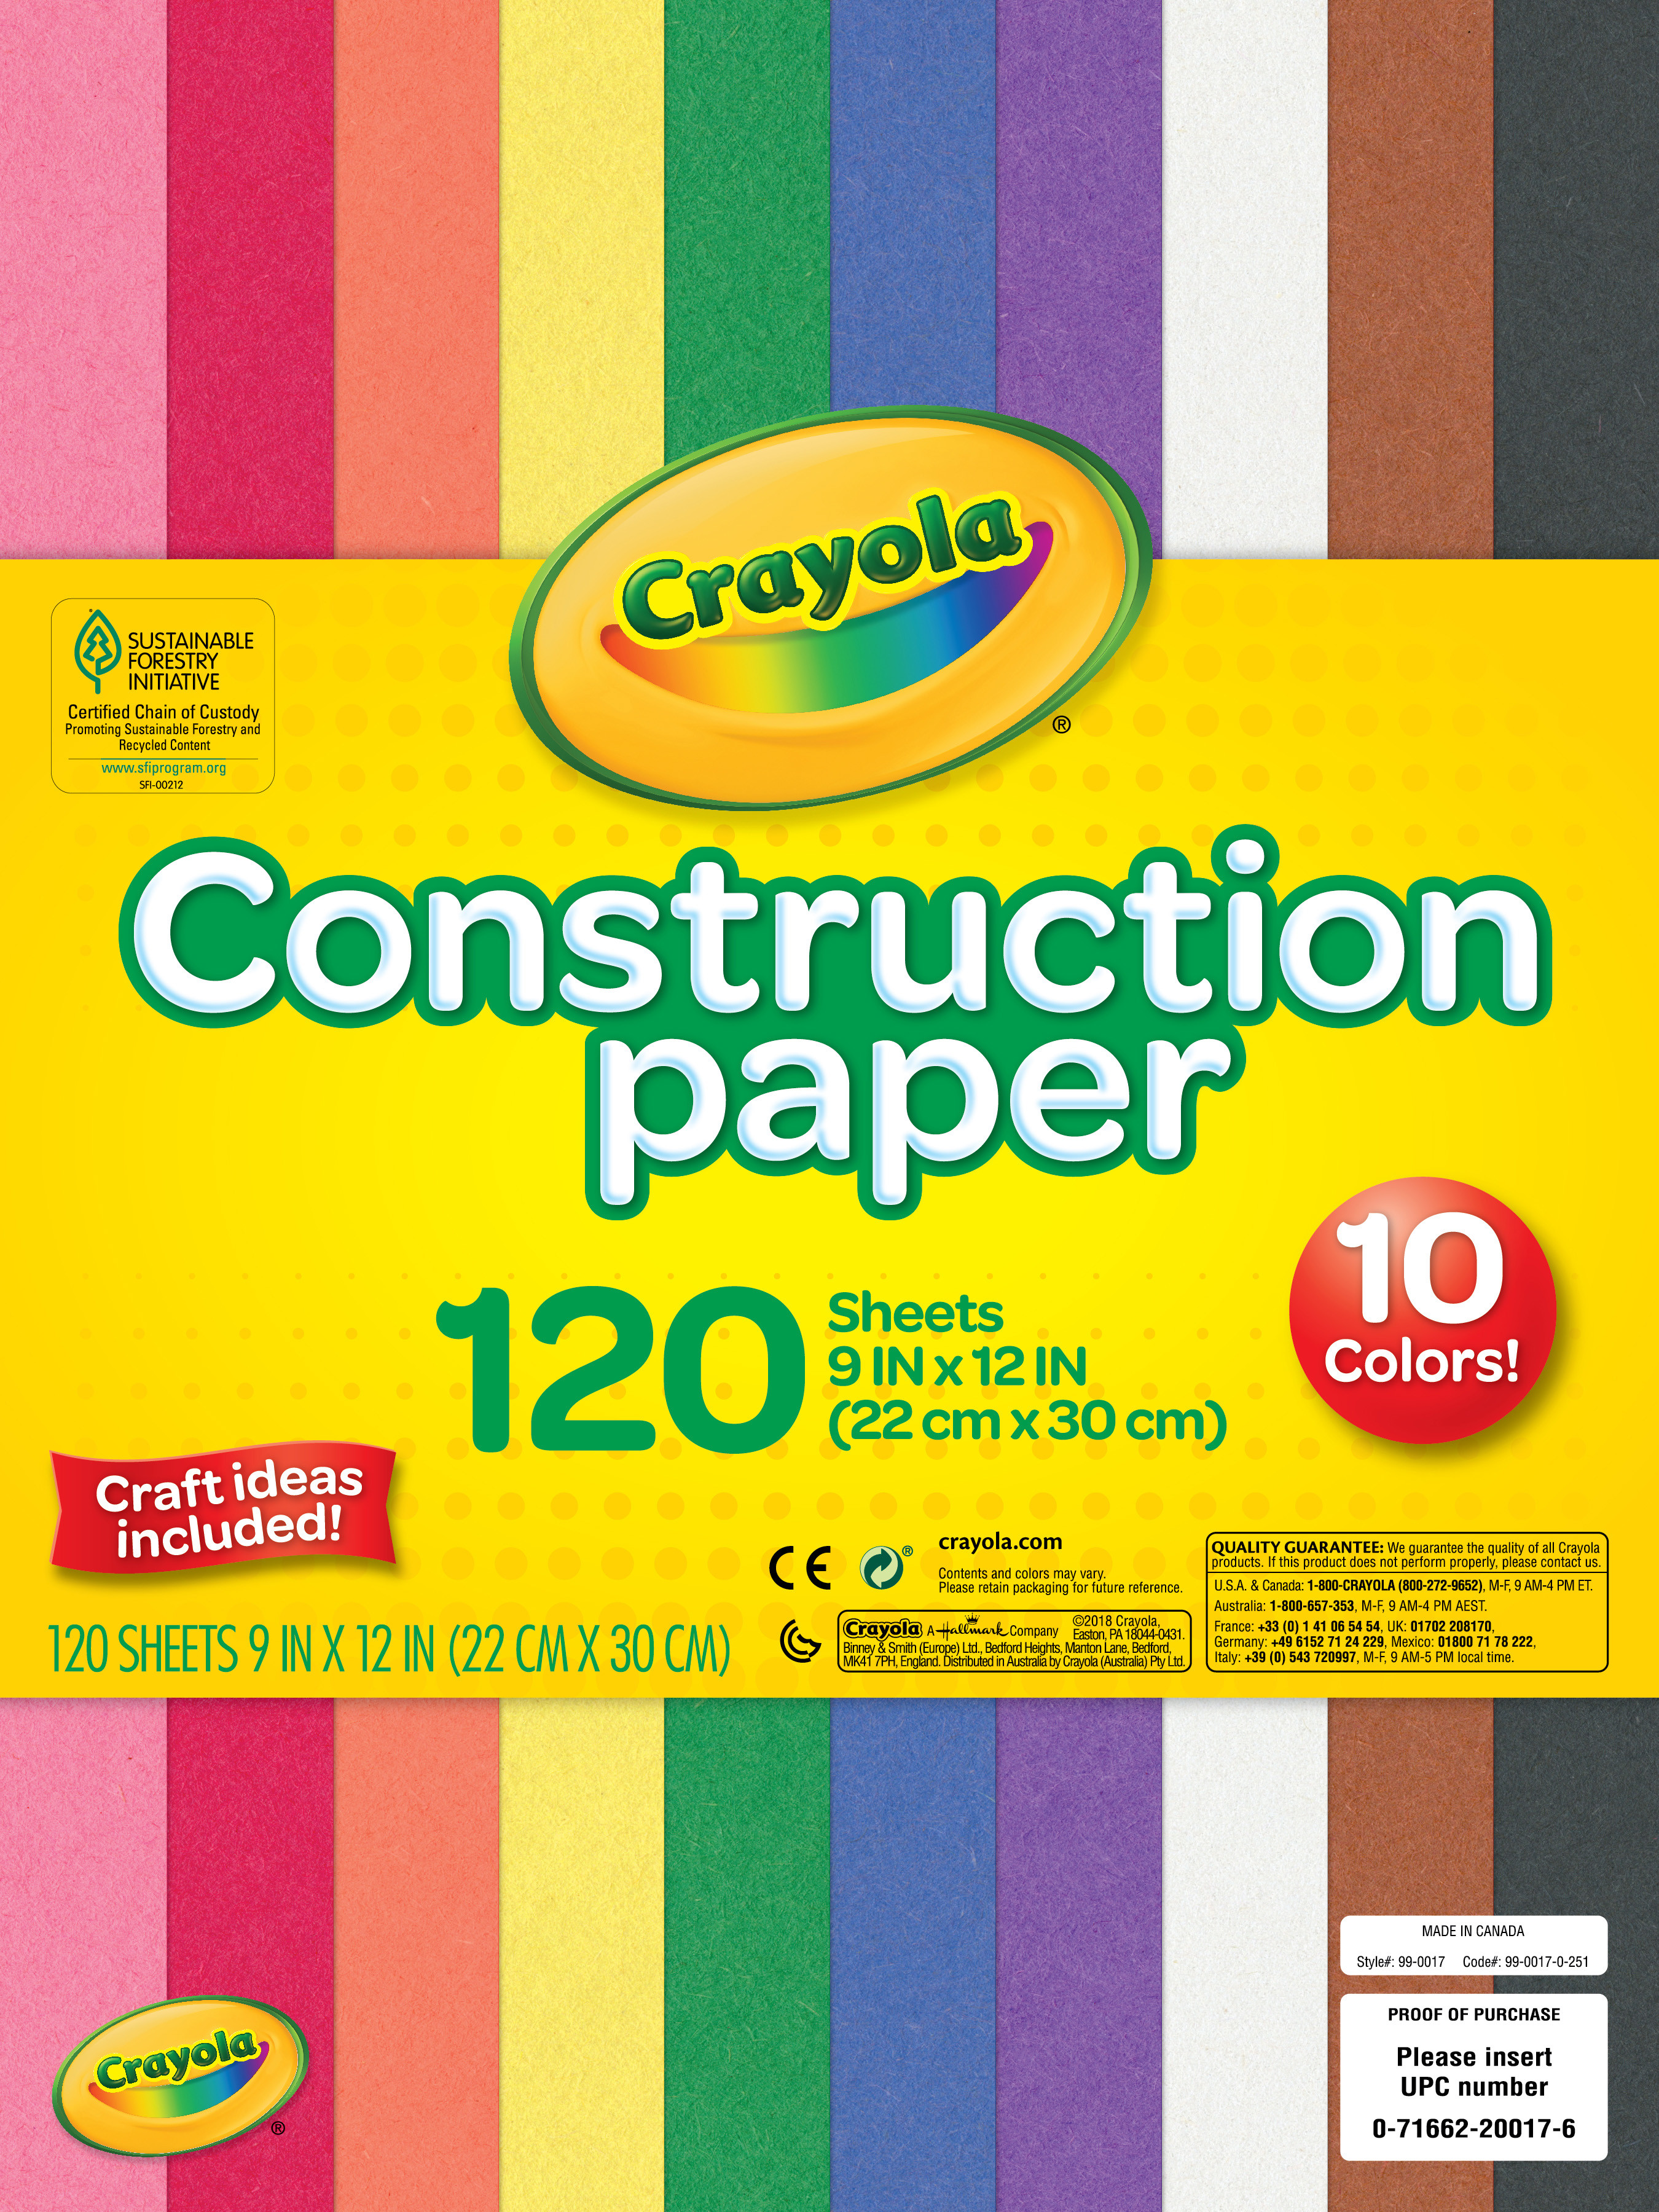 Crayola Construction Colored Paper in 10 Colors, School Supplies for Kindergarten, 120 Pcs, Child - image 1 of 11